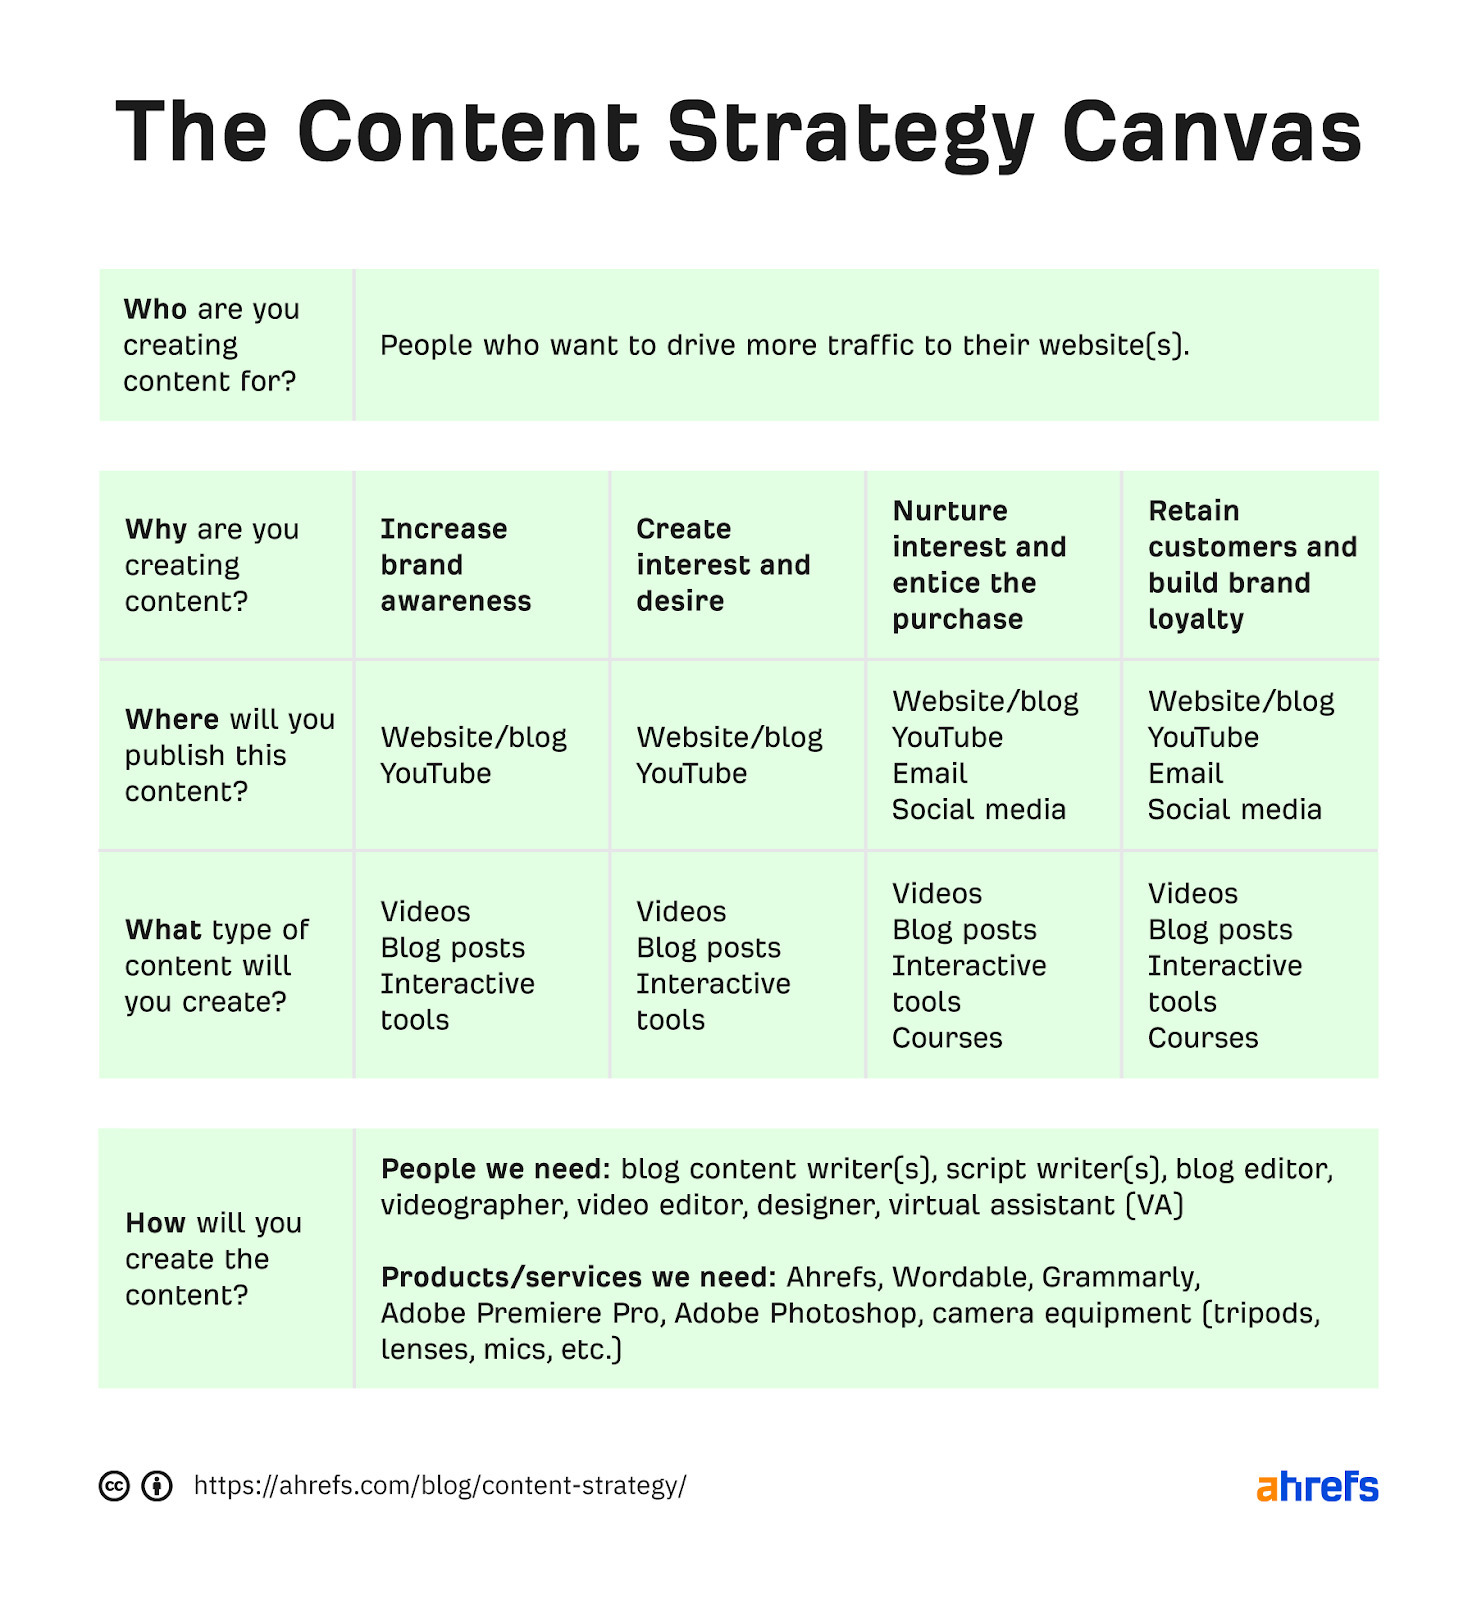 Table summarizing content strategy